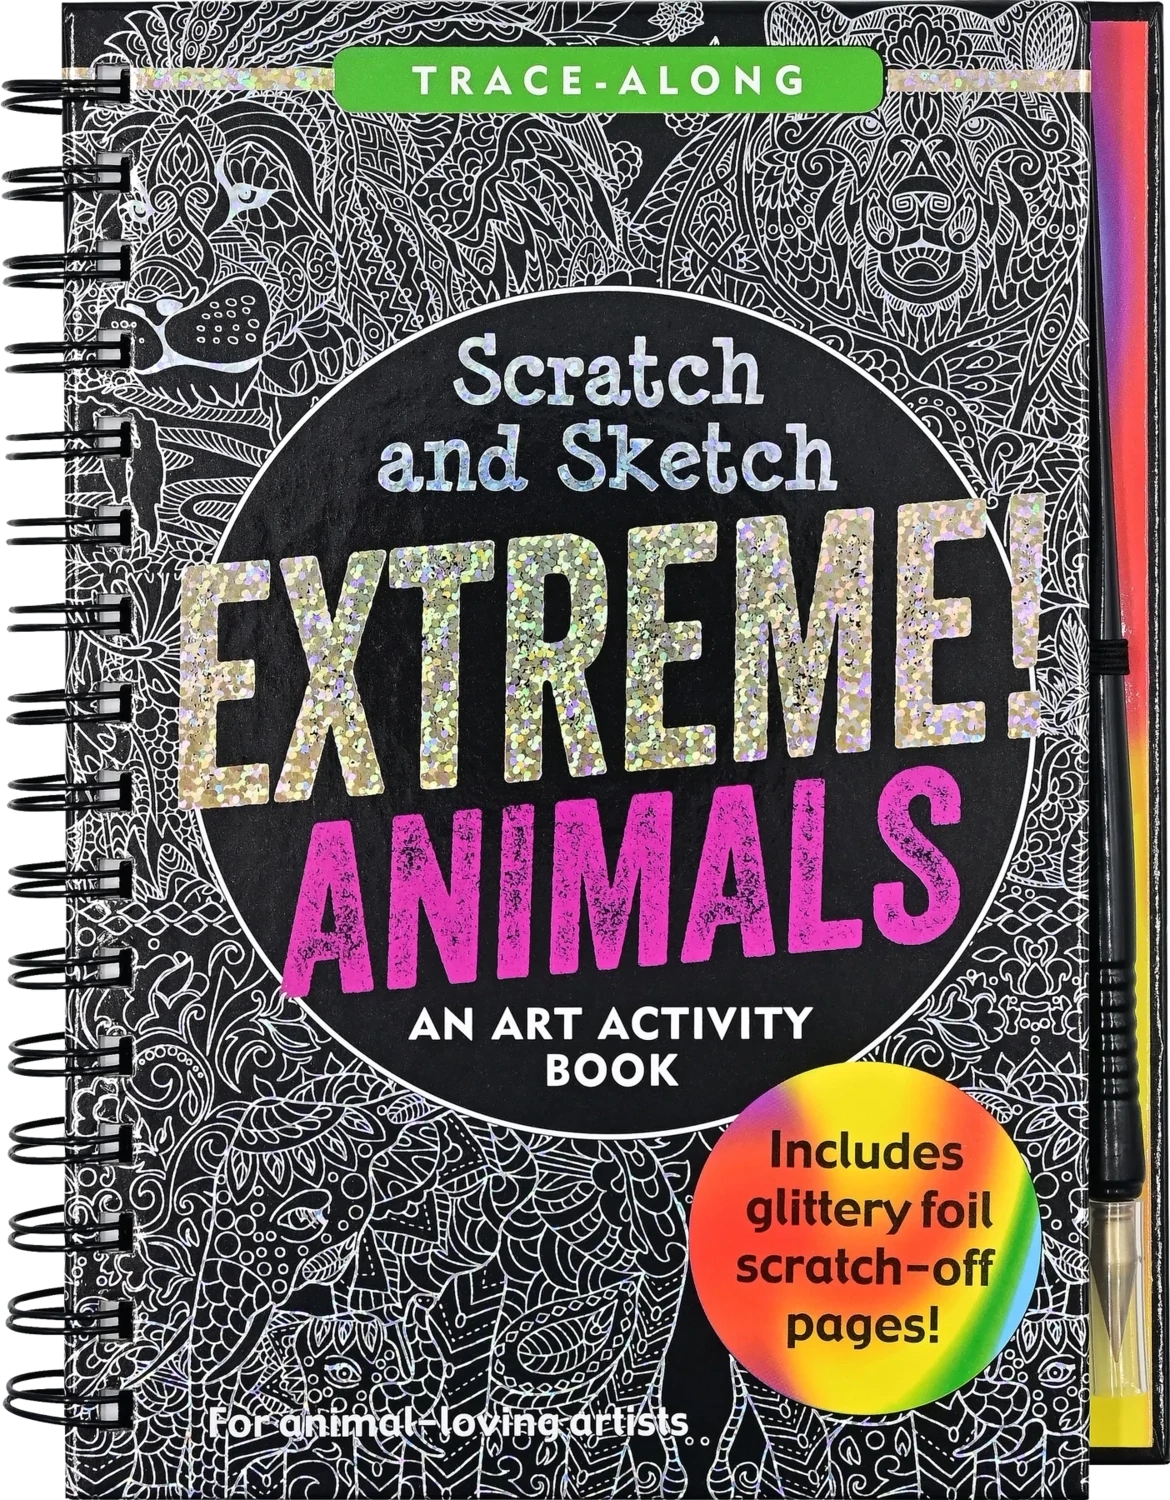 Book Scratch And Sketch Extreme Animals